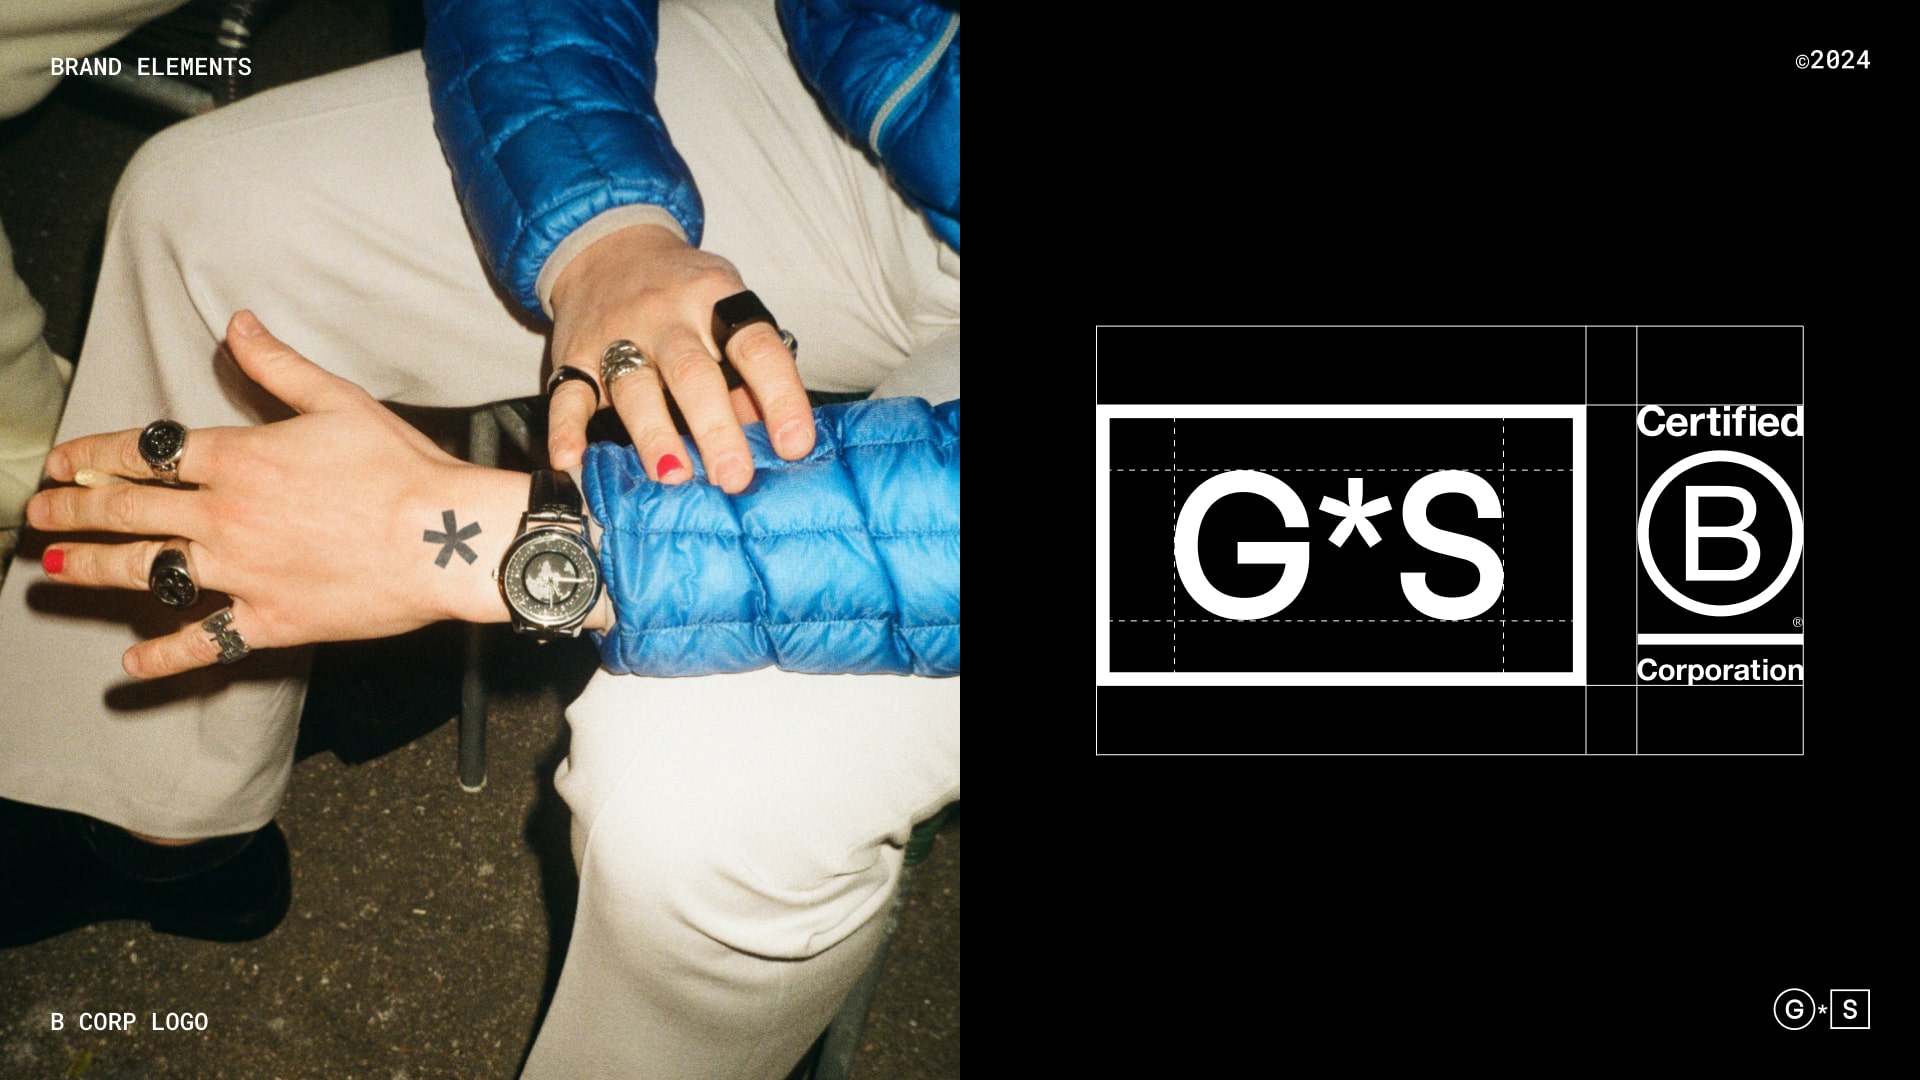 Geist*Studio – Taking Brands Beyond the Physical